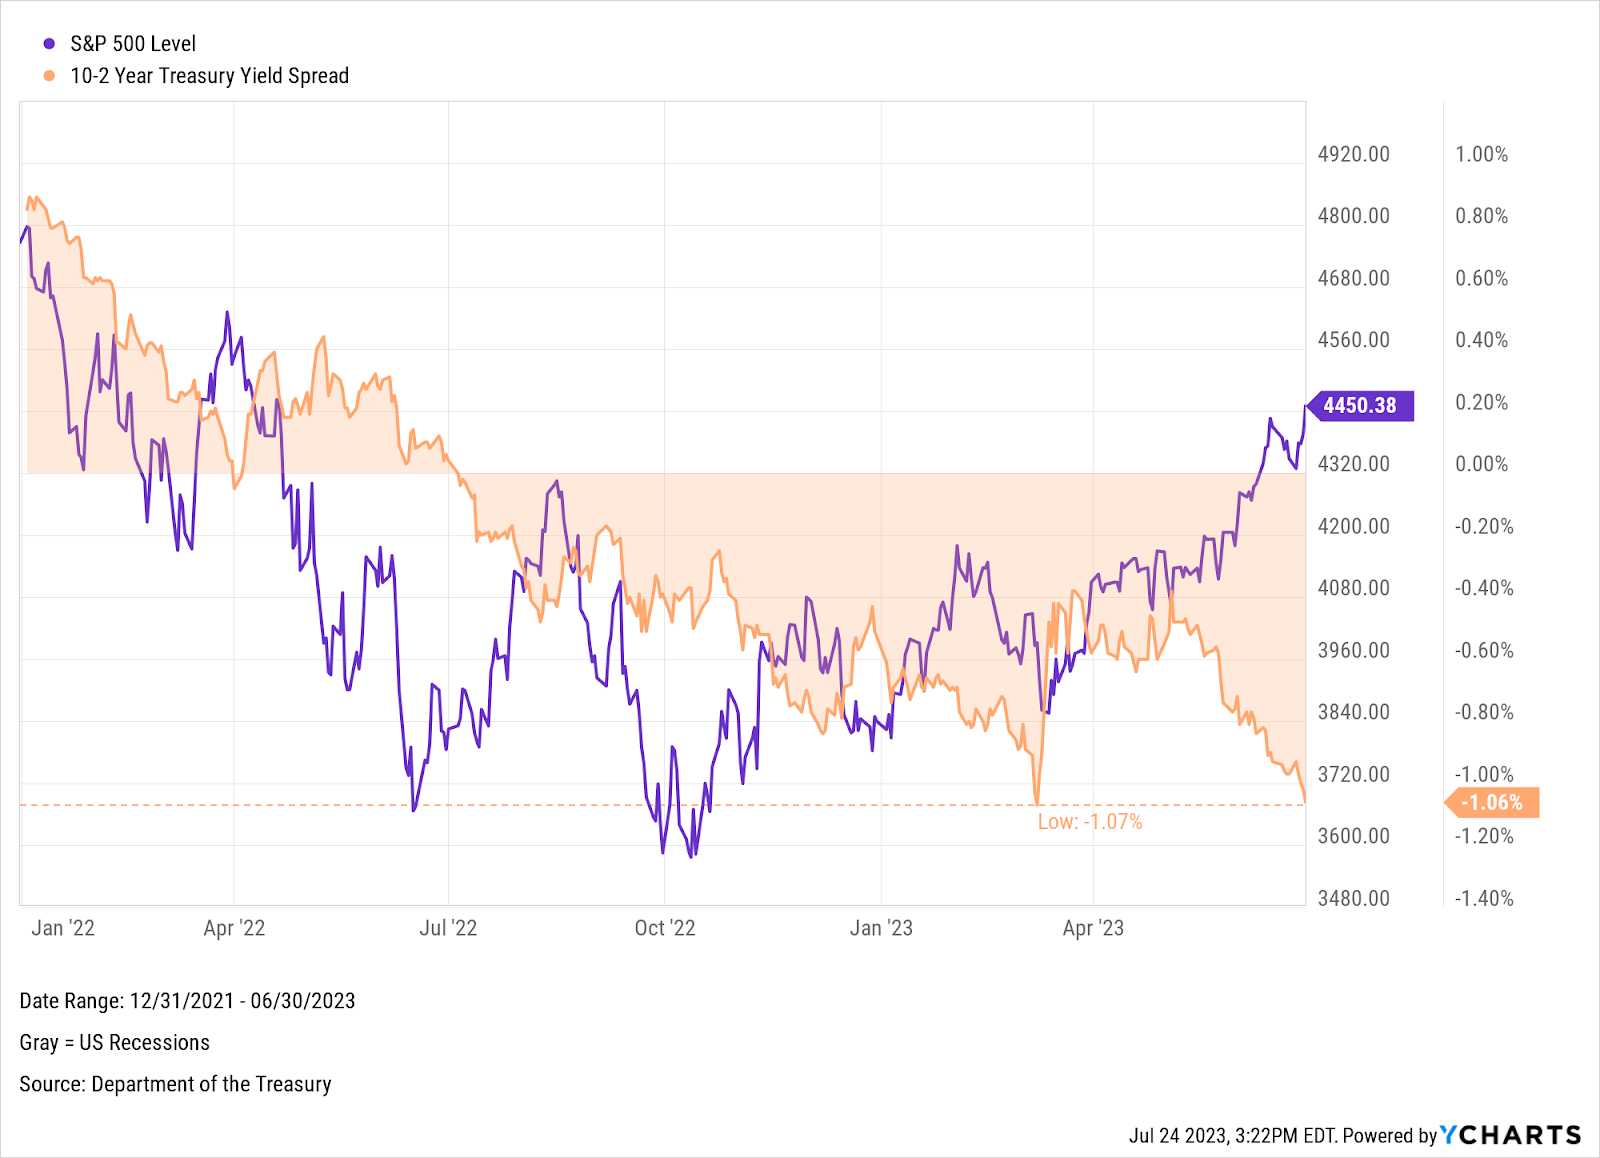 A chart showing the S&P 500 and the 10-2 year treasury yield spread from 12/31/2021 - 6/30/2023